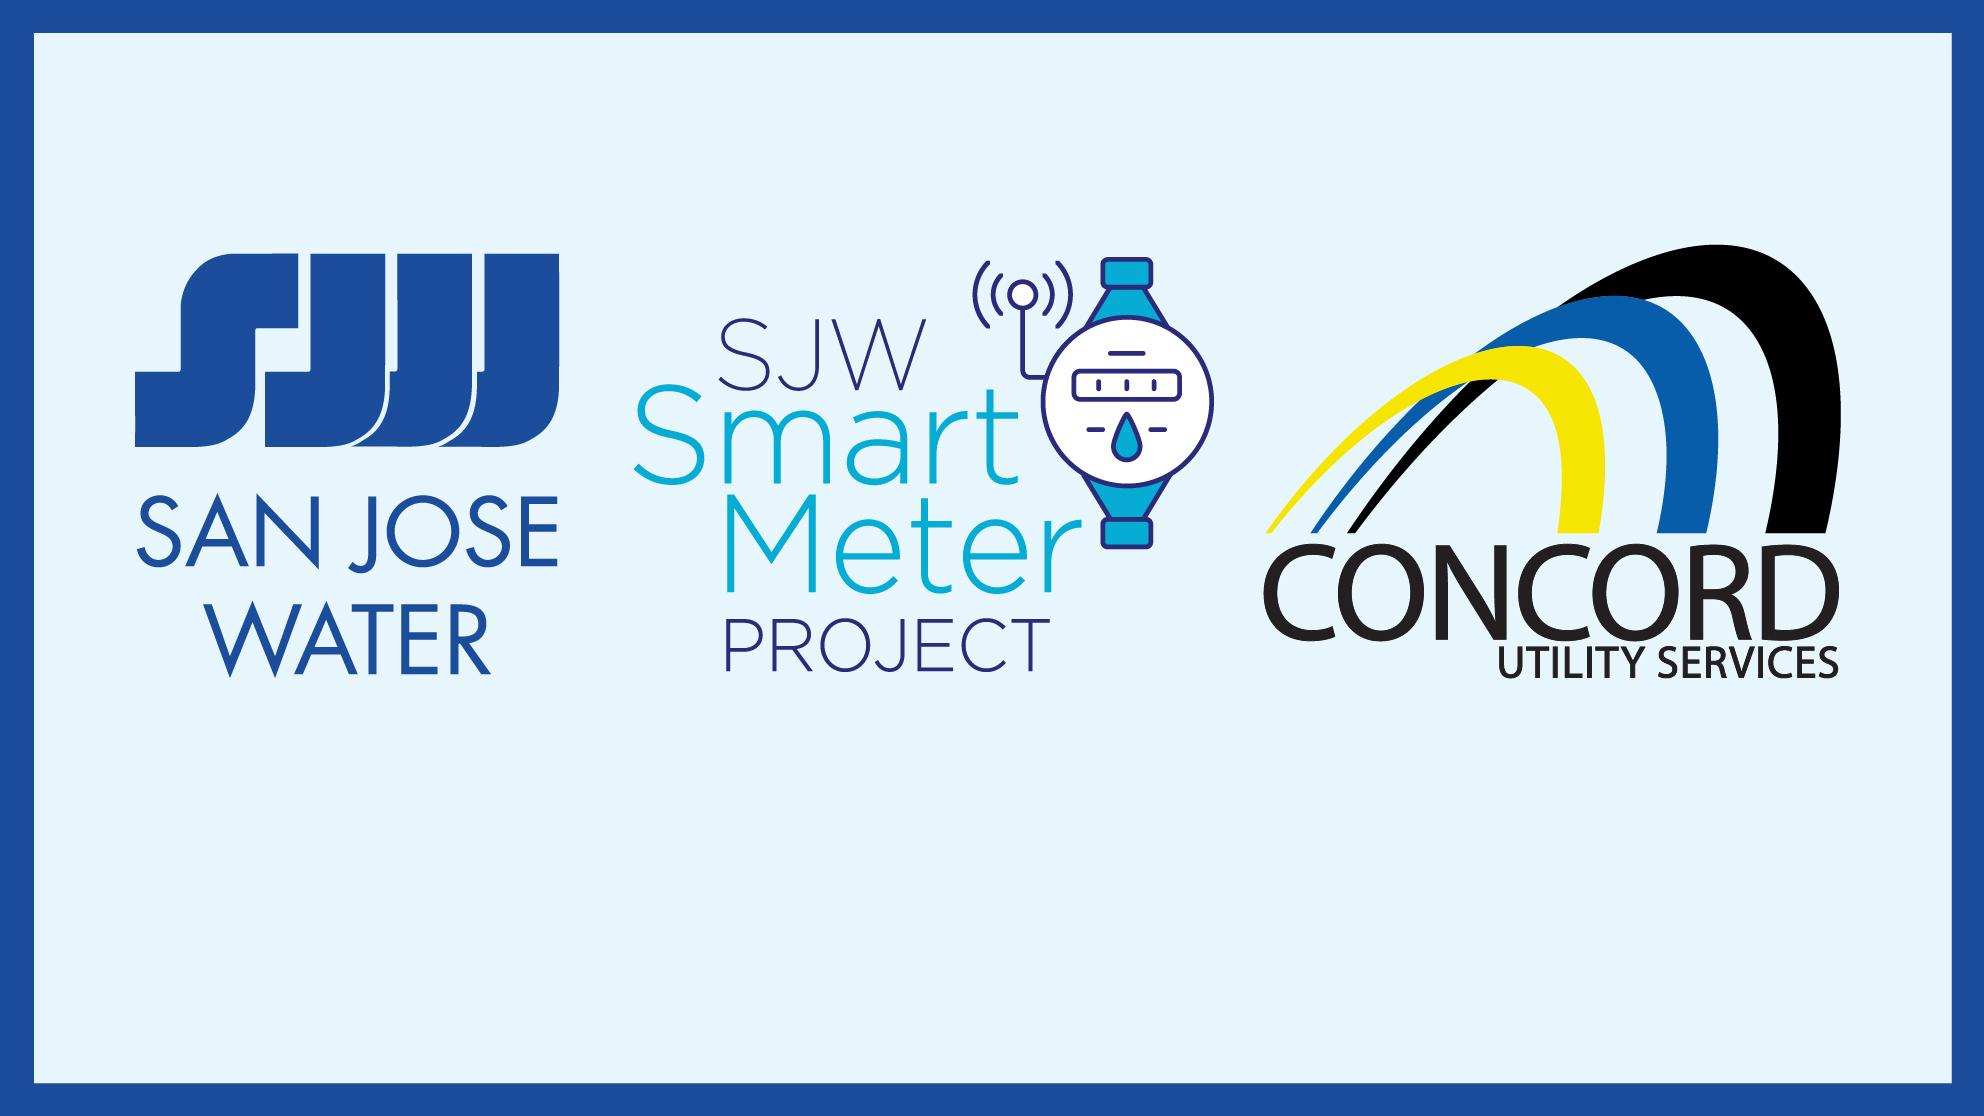 SJW, Smart Meter Project, and Concord Utility Services logos